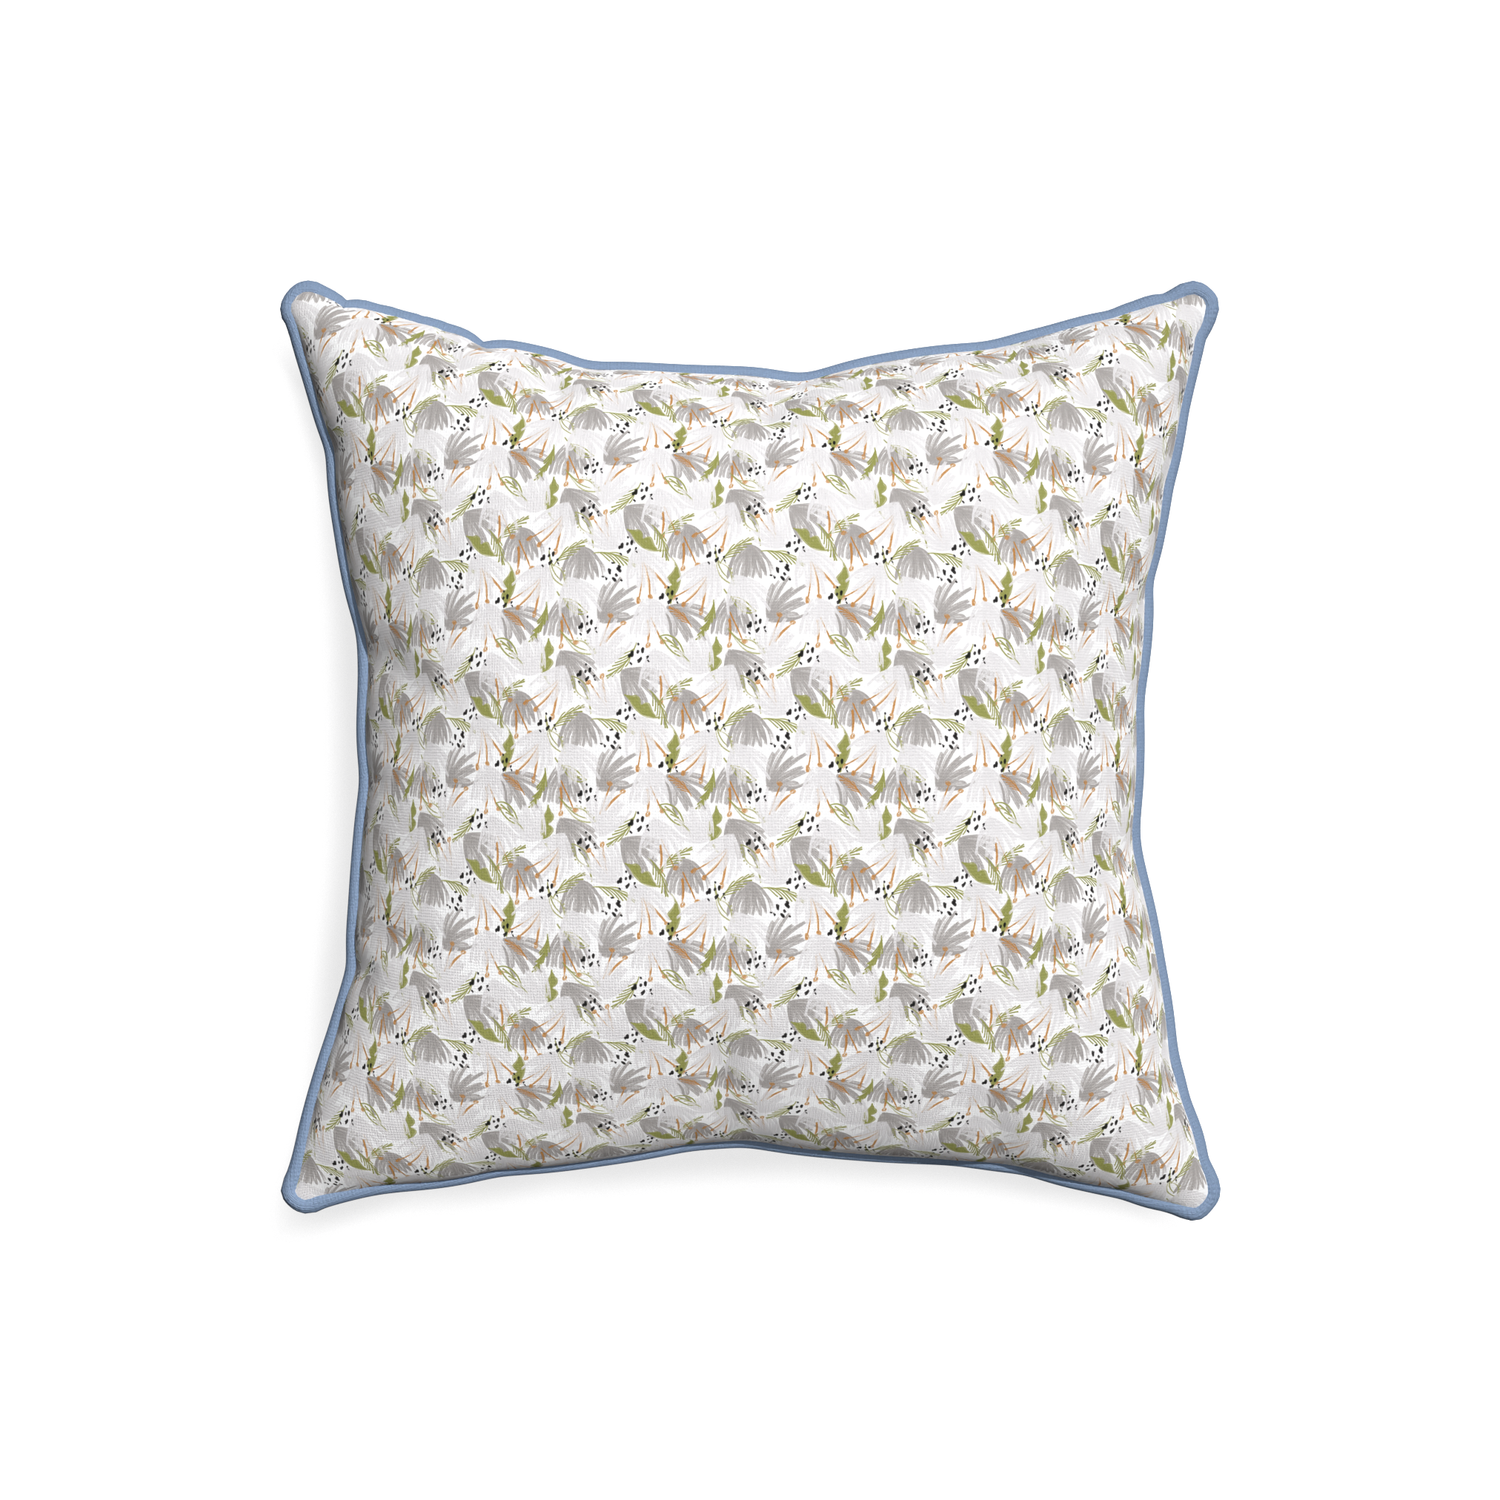 20-square eden grey custom pillow with sky piping on white background